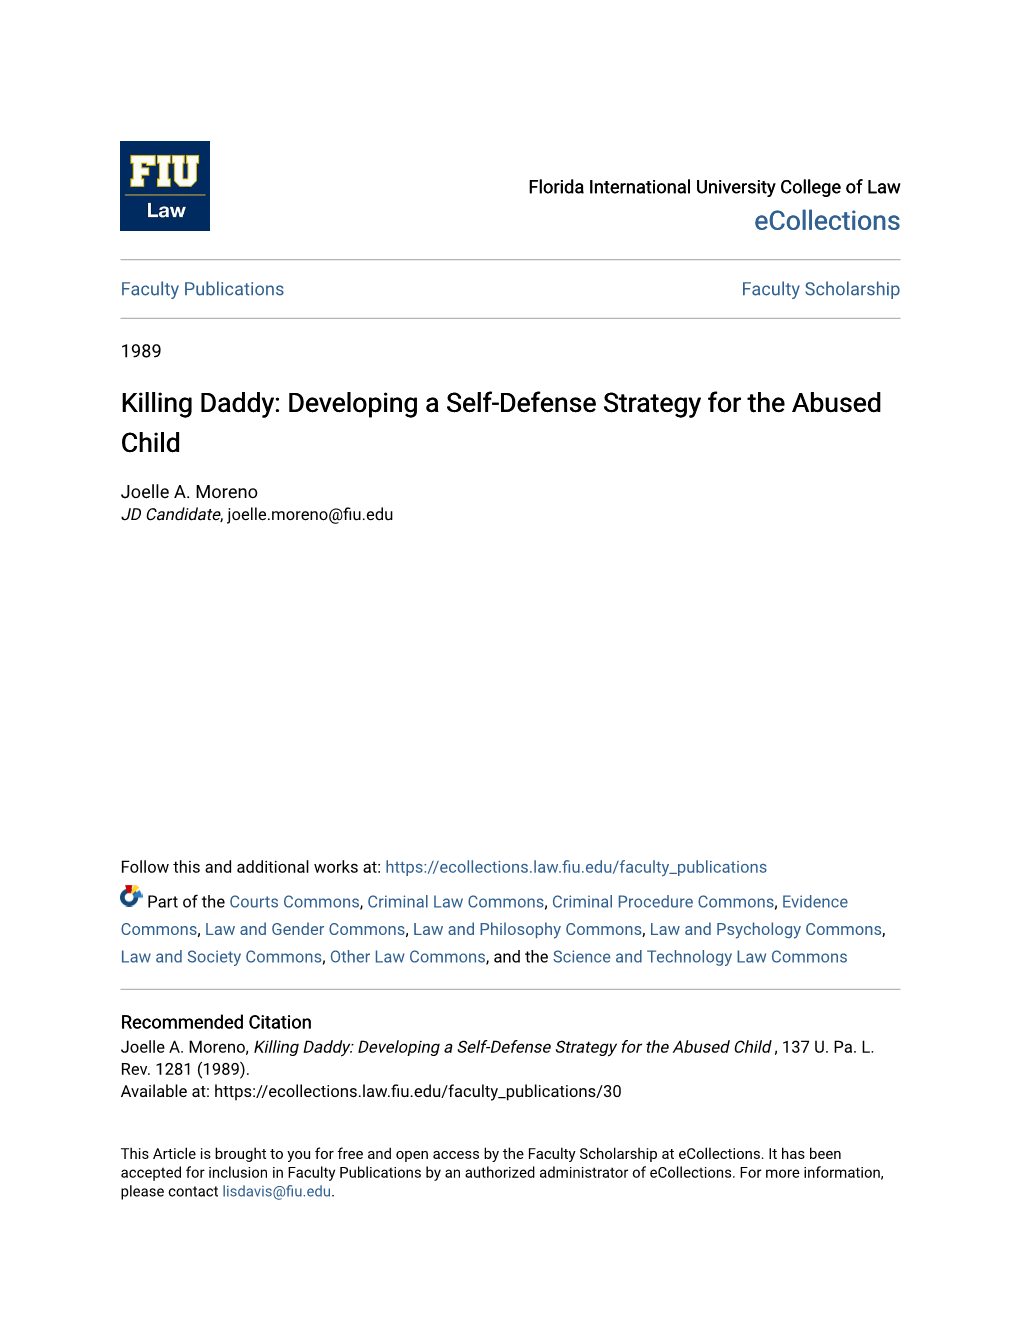 Killing Daddy: Developing a Self-Defense Strategy for the Abused Child